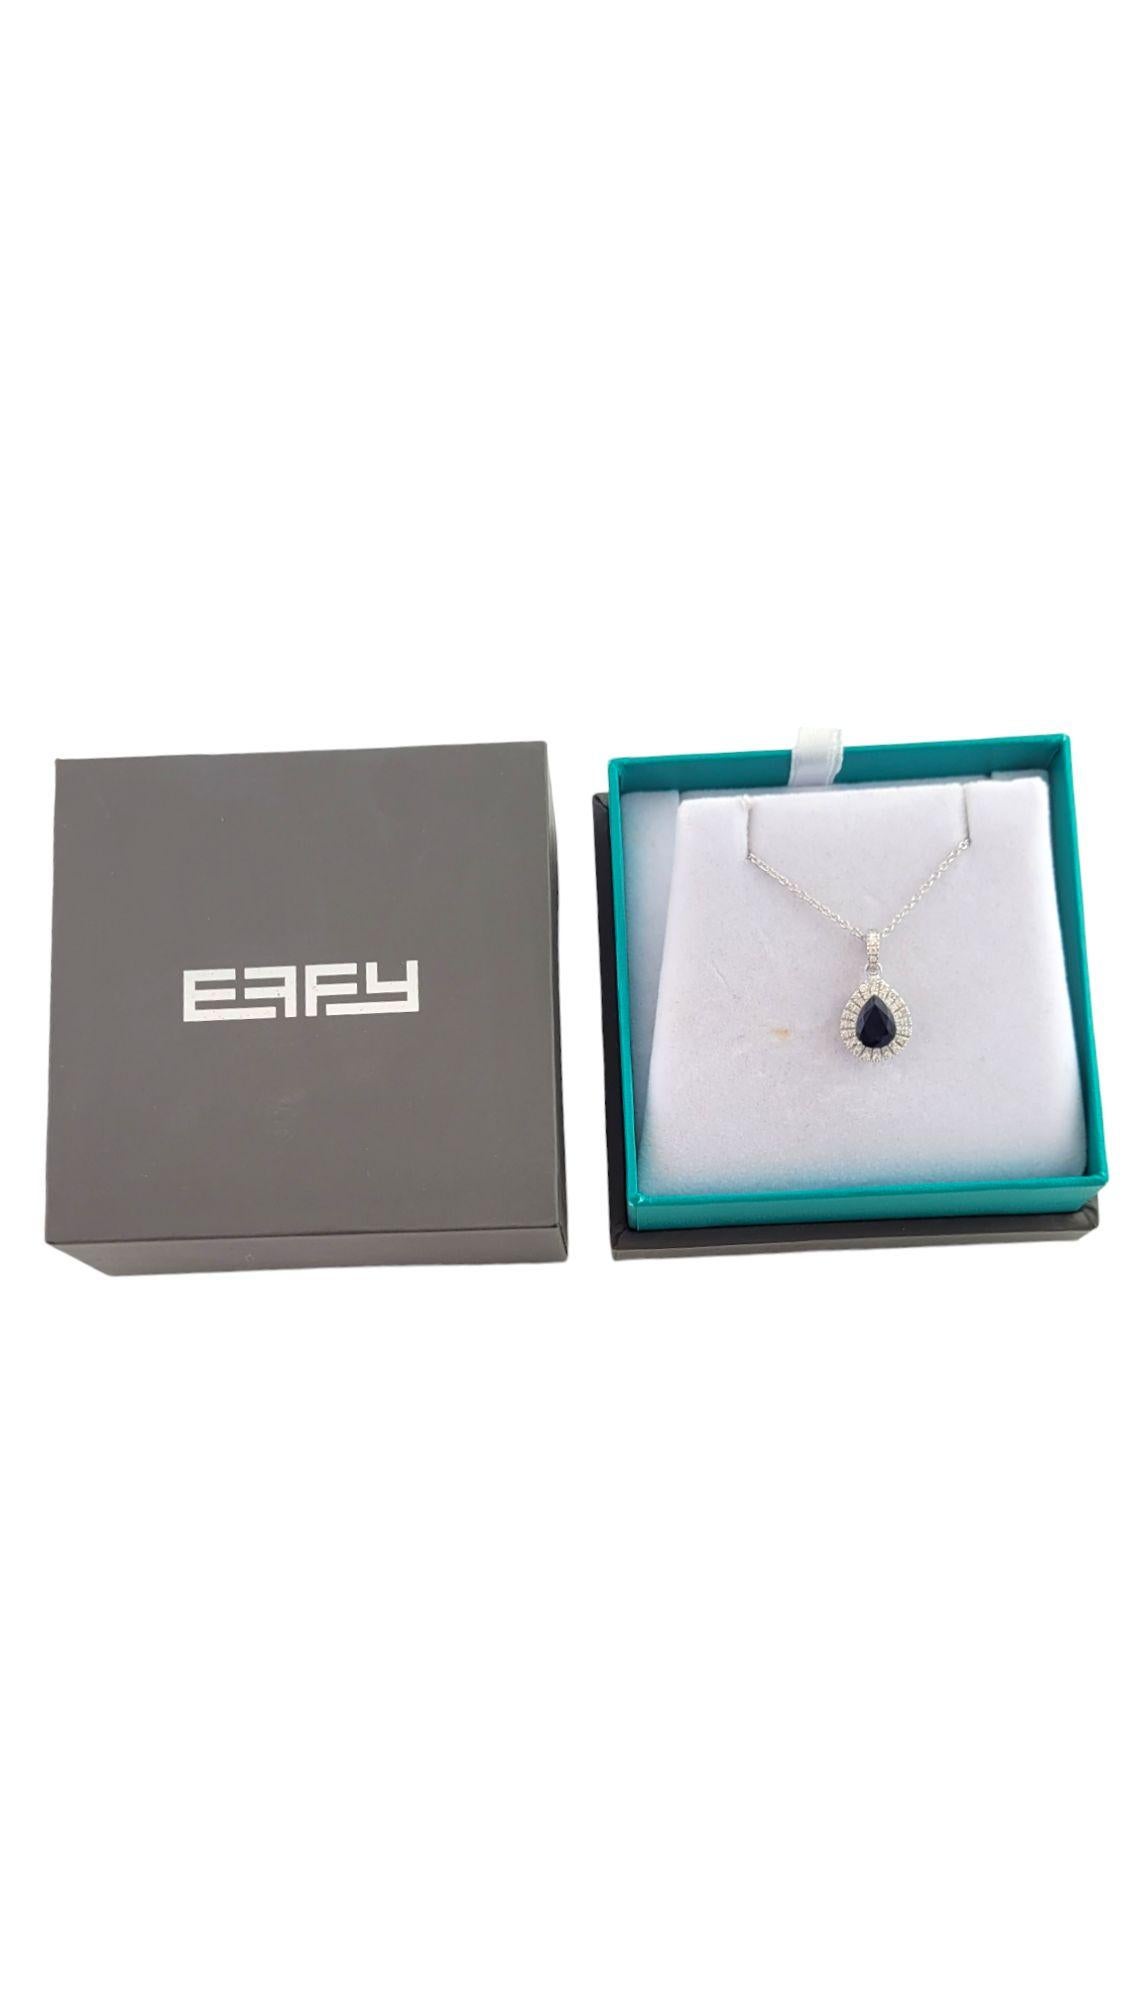 Effy 14K White Gold Pear Shape Blue Sapphire Diamond Frame Pendant Necklace

This gorgeous Effy necklace features a beautiful blue sapphire surrounded by a diamond frame with 45 sparkling round cut diamonds!

Sapphire: 8mm X 6mm

Approximate total